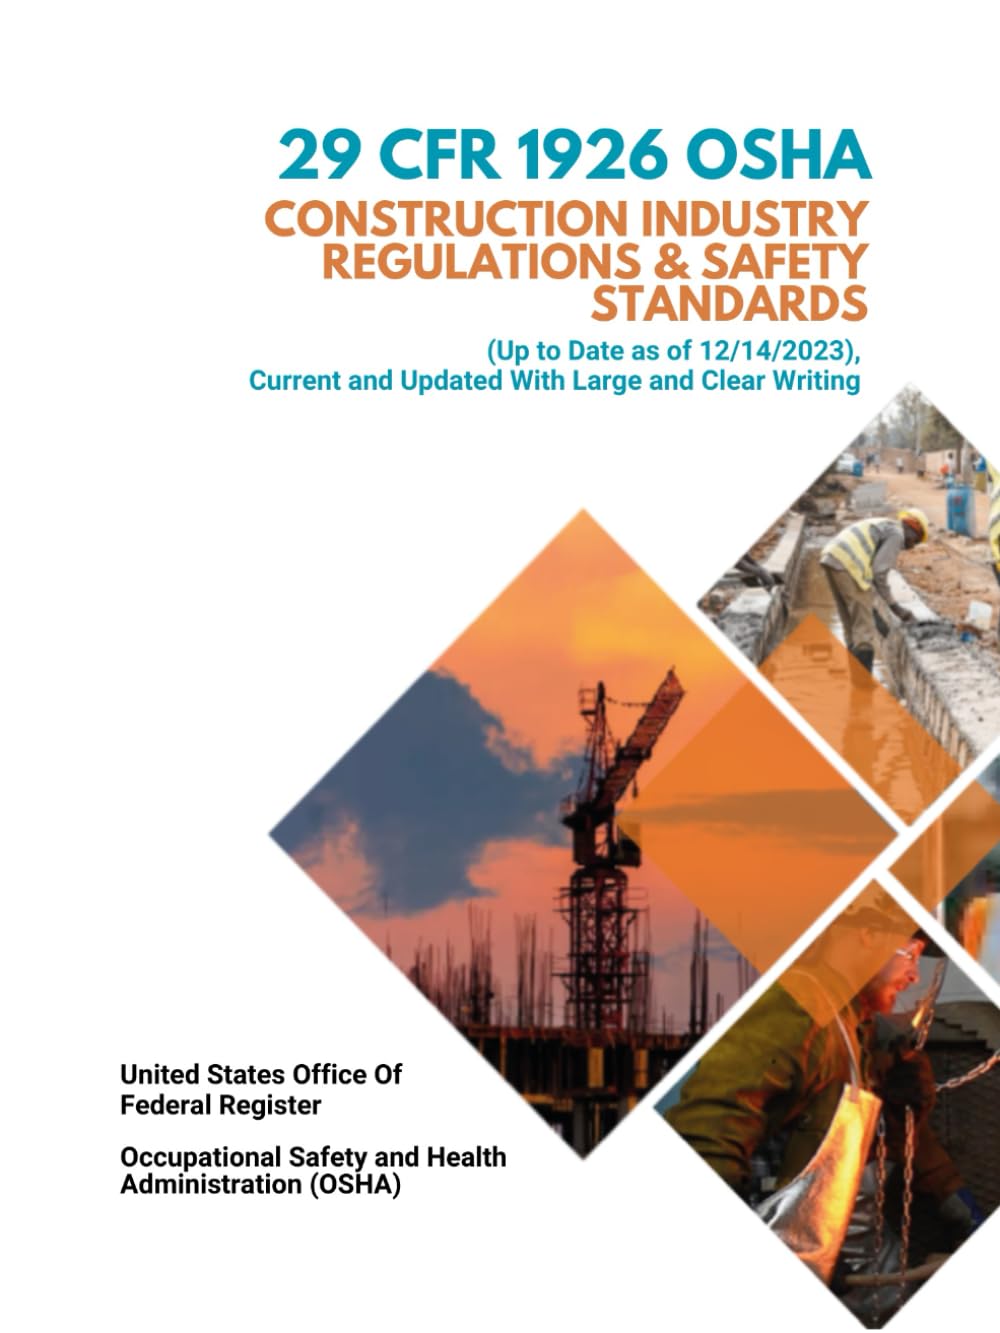 29 CFR 1926 OSHA Construction Industry Regulations & Safety Standards: (Up to Date as of 12/14/2023), Current and Updated With Large and Clear Writing